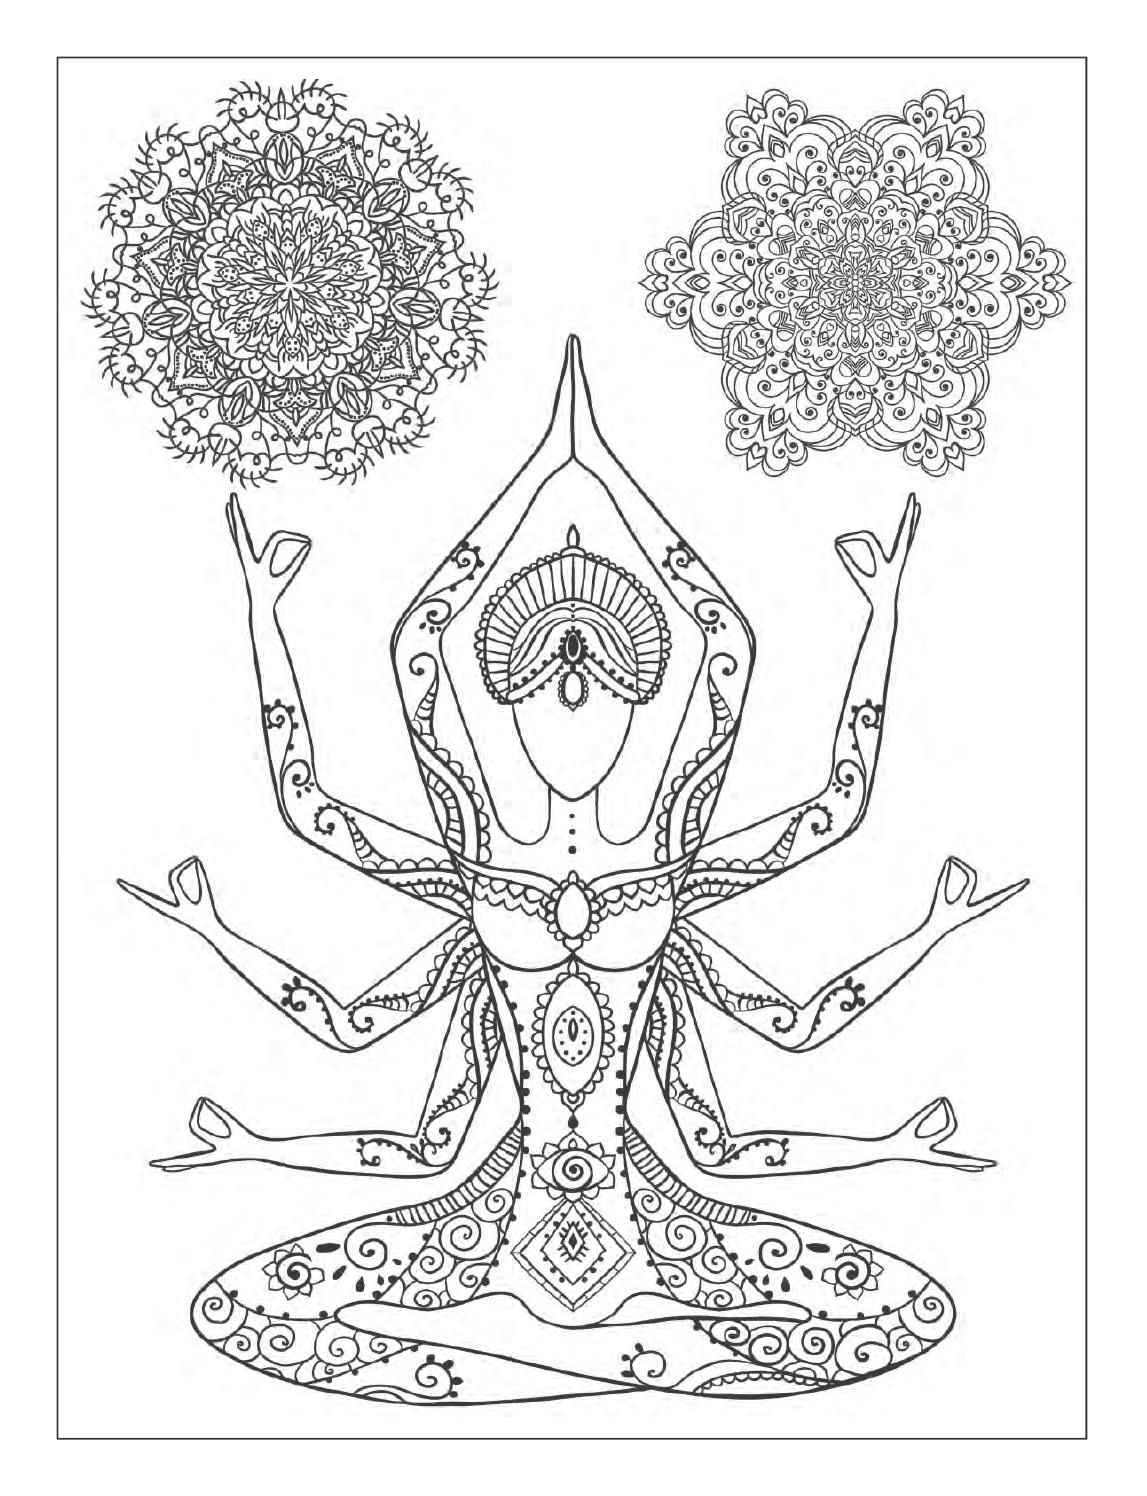 Yoga and meditation coloring book for adults: With Yoga Poses and Mandalas  | Mandala coloring books, Coloring books, Coloring pages